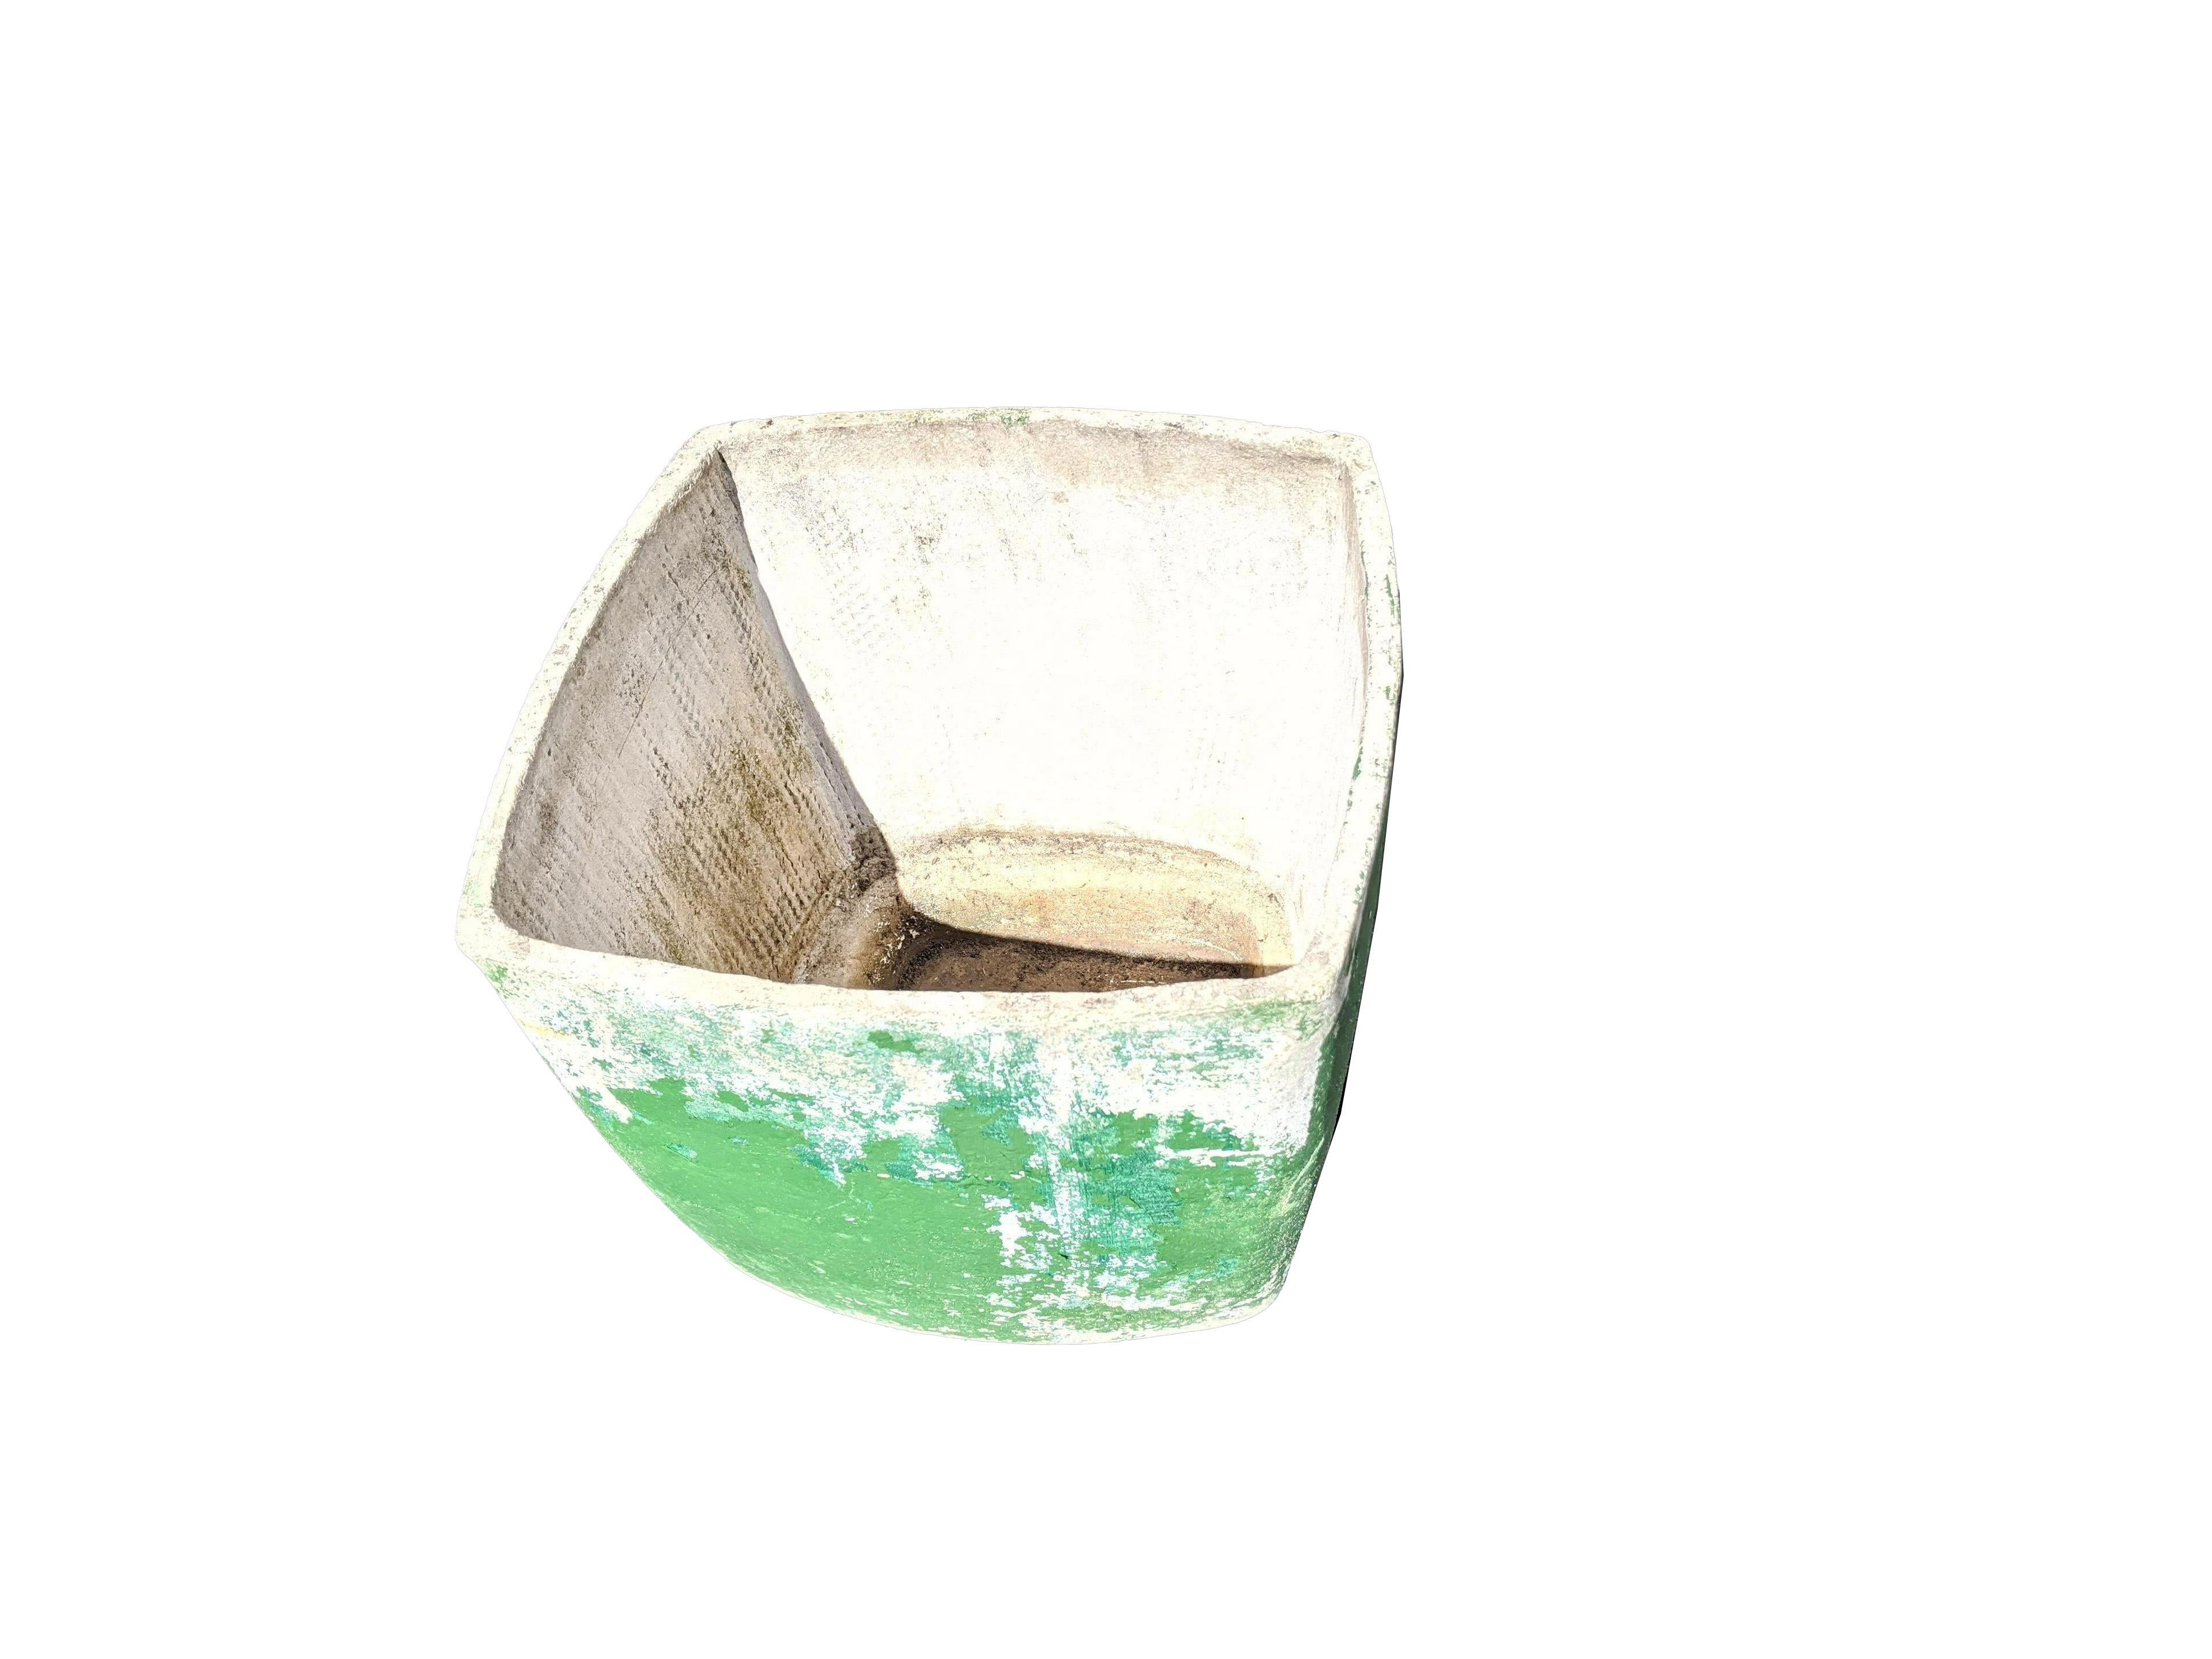 Concrete Willy Guhl Planter with Green Paint